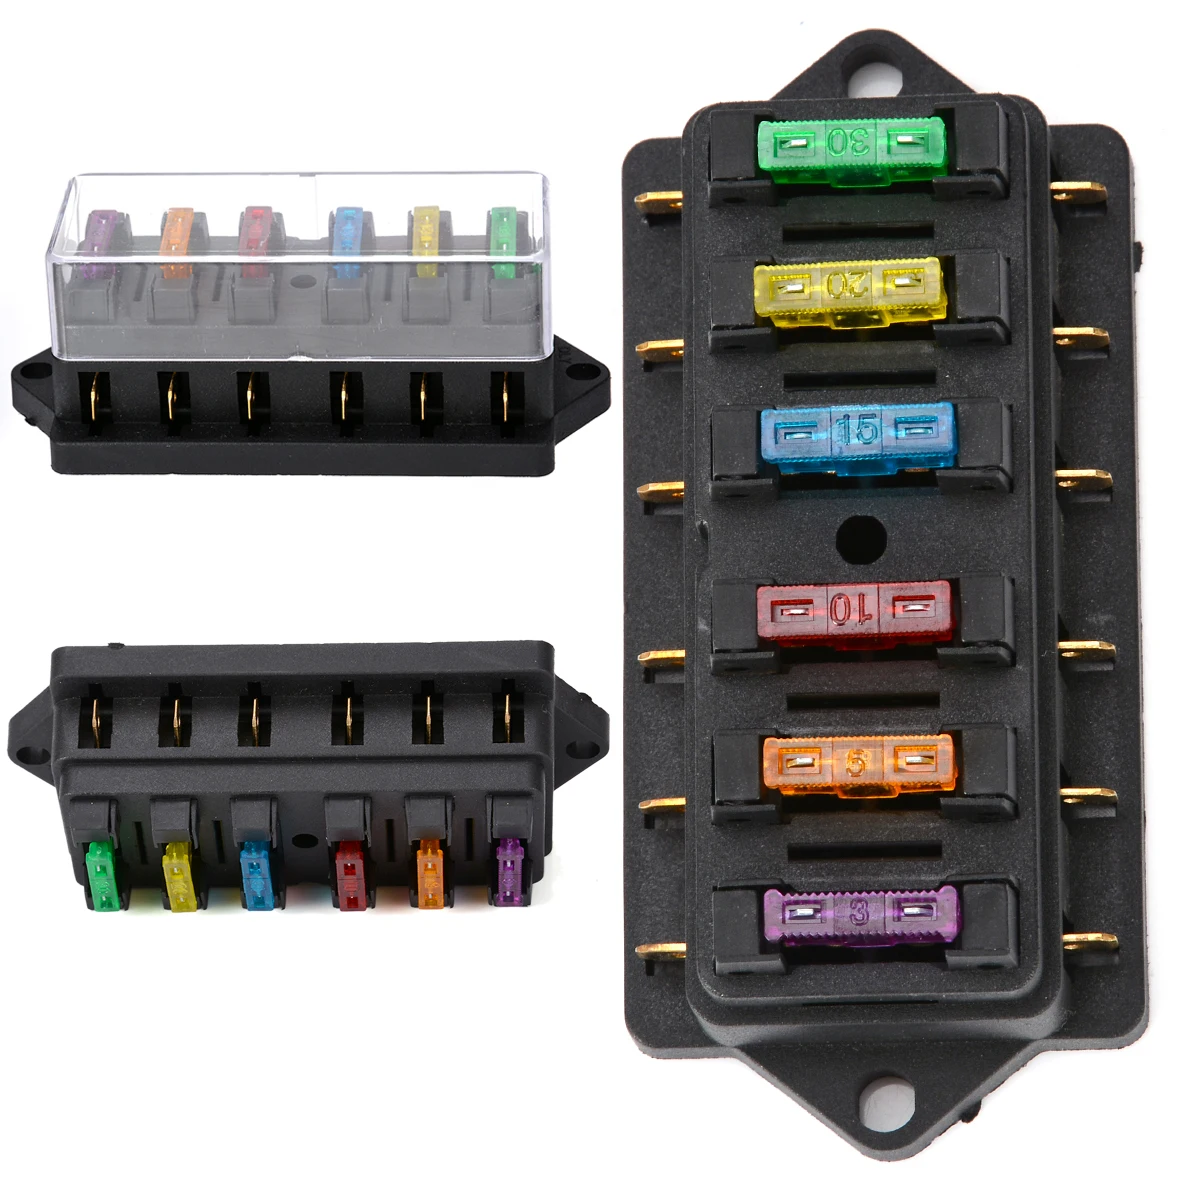 1pc 6.3mm 6 Way Circuit Standard Blade Fuse Holder DC12V/24V with 6 Fuses For Auto Car Accessories